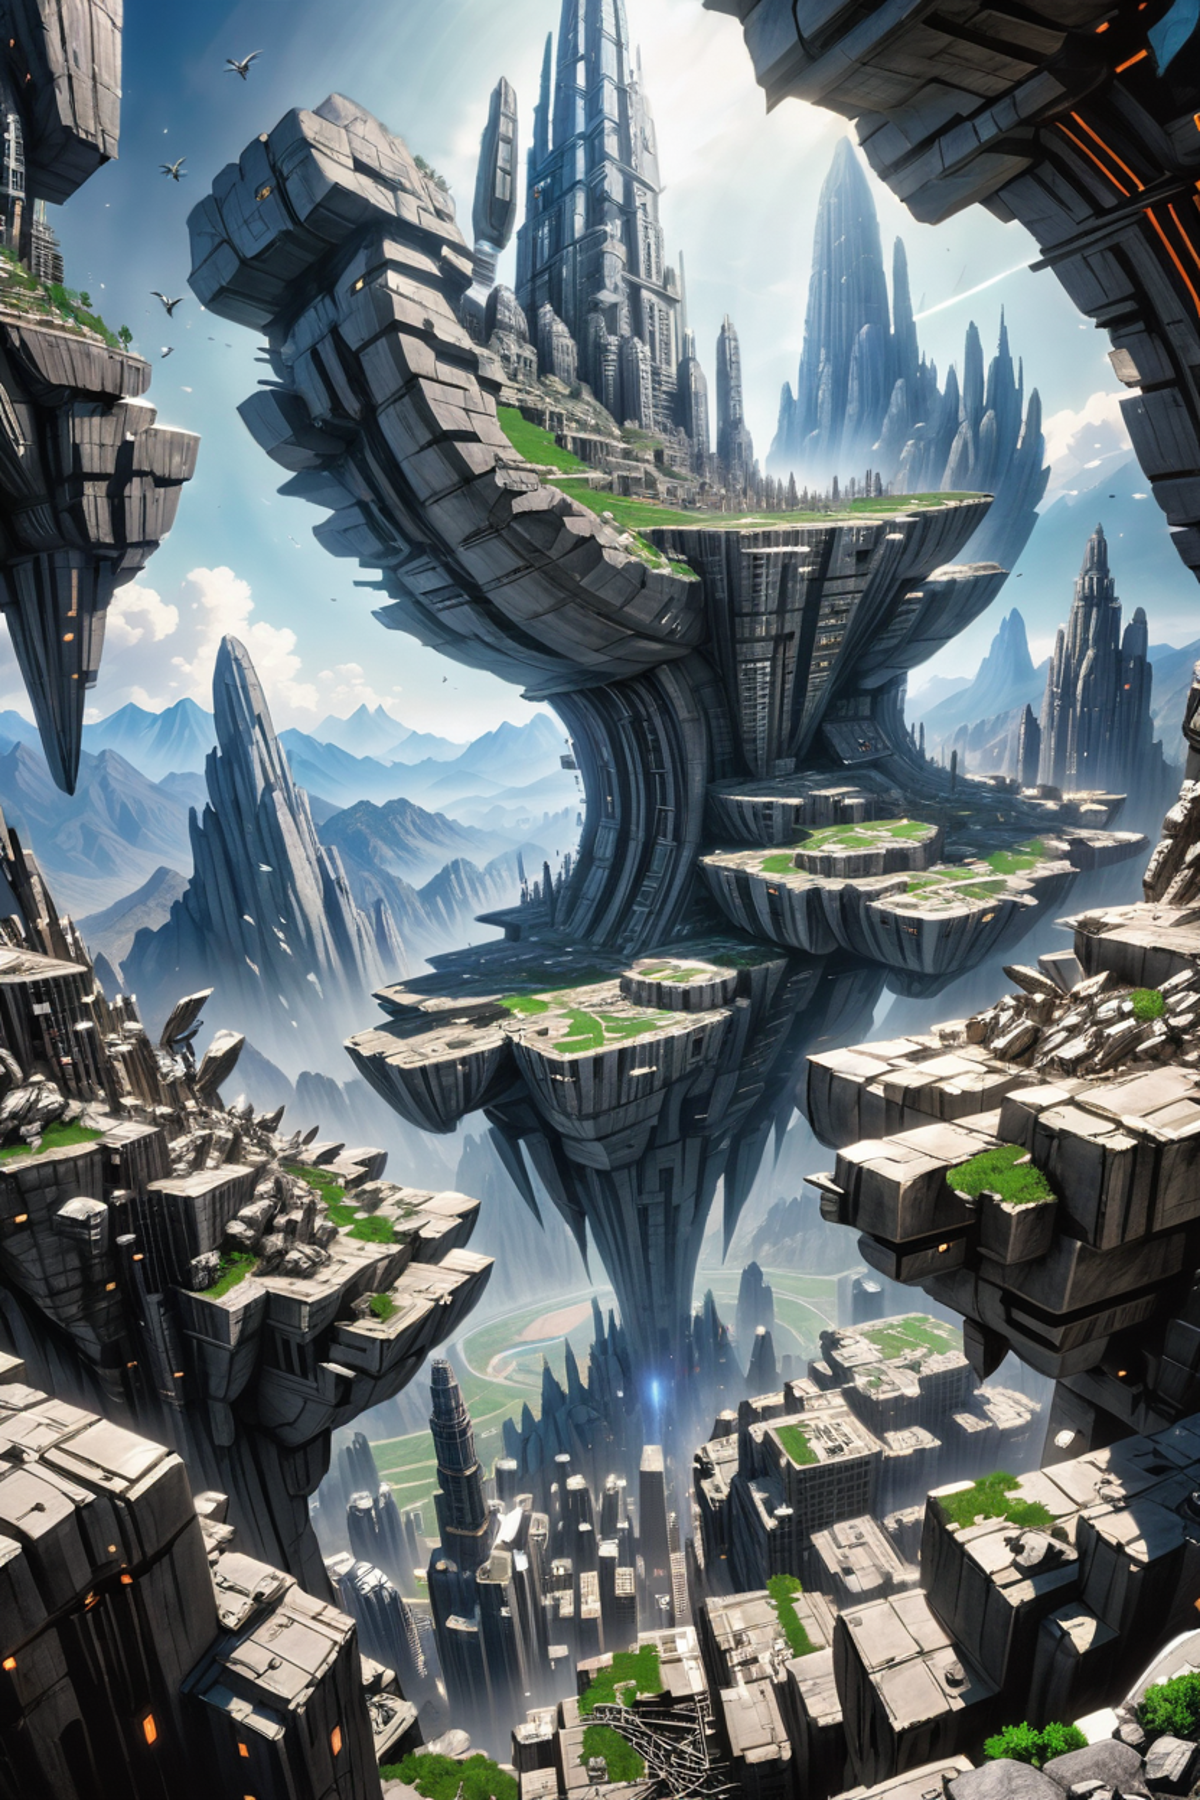 A Futuristic Cityscape with Greenery and Mountainous Terrains